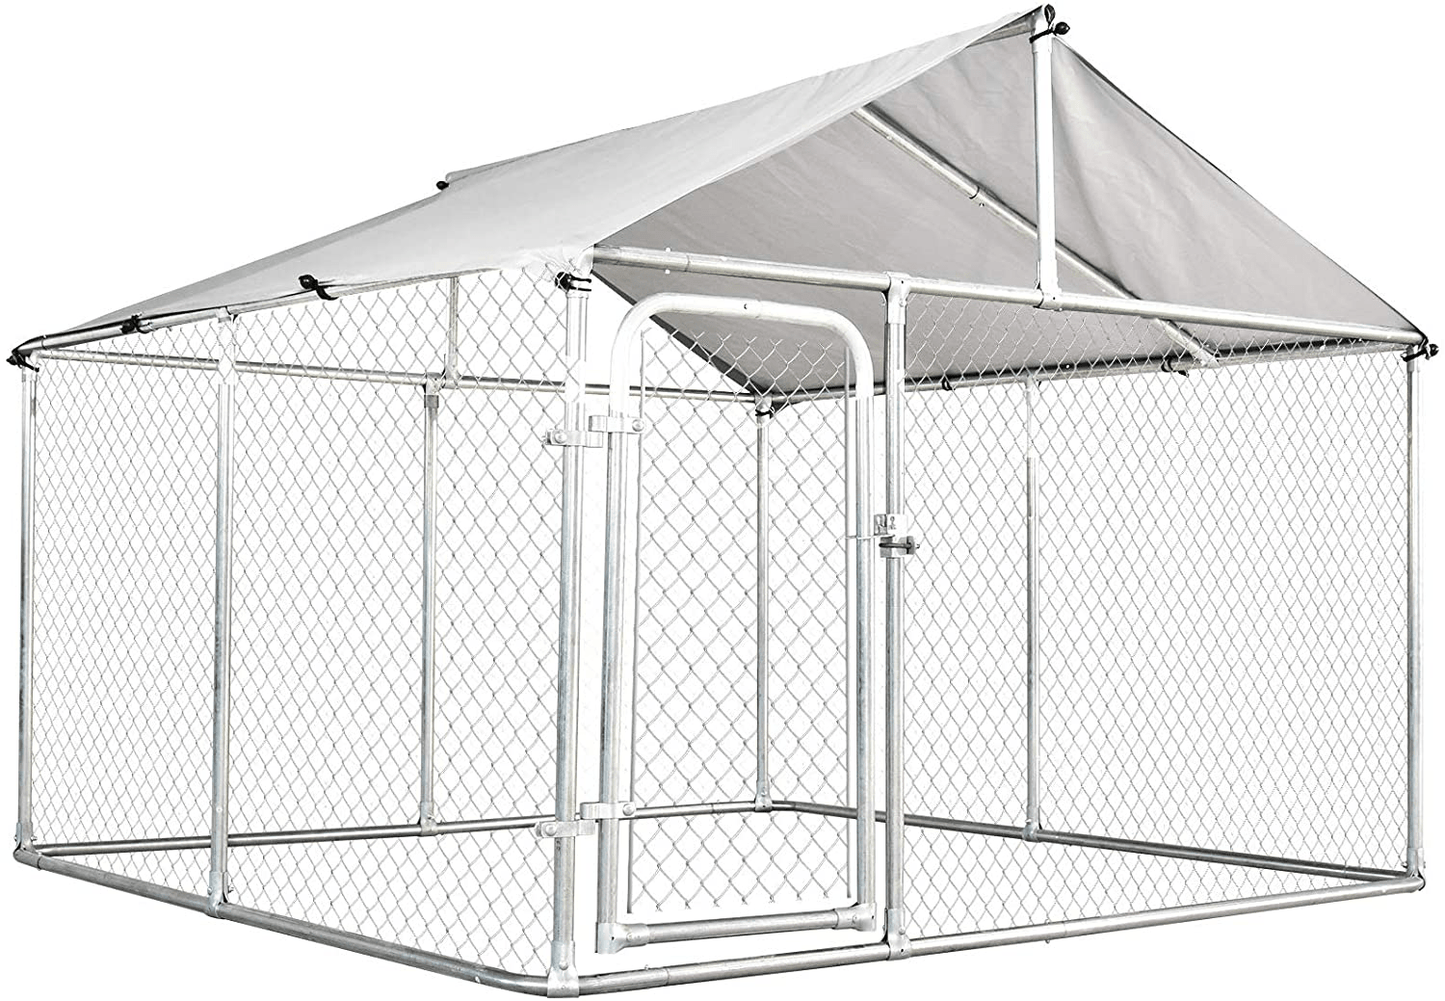 7.5'X7.5'X5.6' Large Outdoor Dog Kennel, Dog Cratefor Back or Front Yard Galvanized Steel Fence with Oxford Cloth Roof and Lock Animals & Pet Supplies > Pet Supplies > Dog Supplies > Dog Kennels & Runs Fest-night   